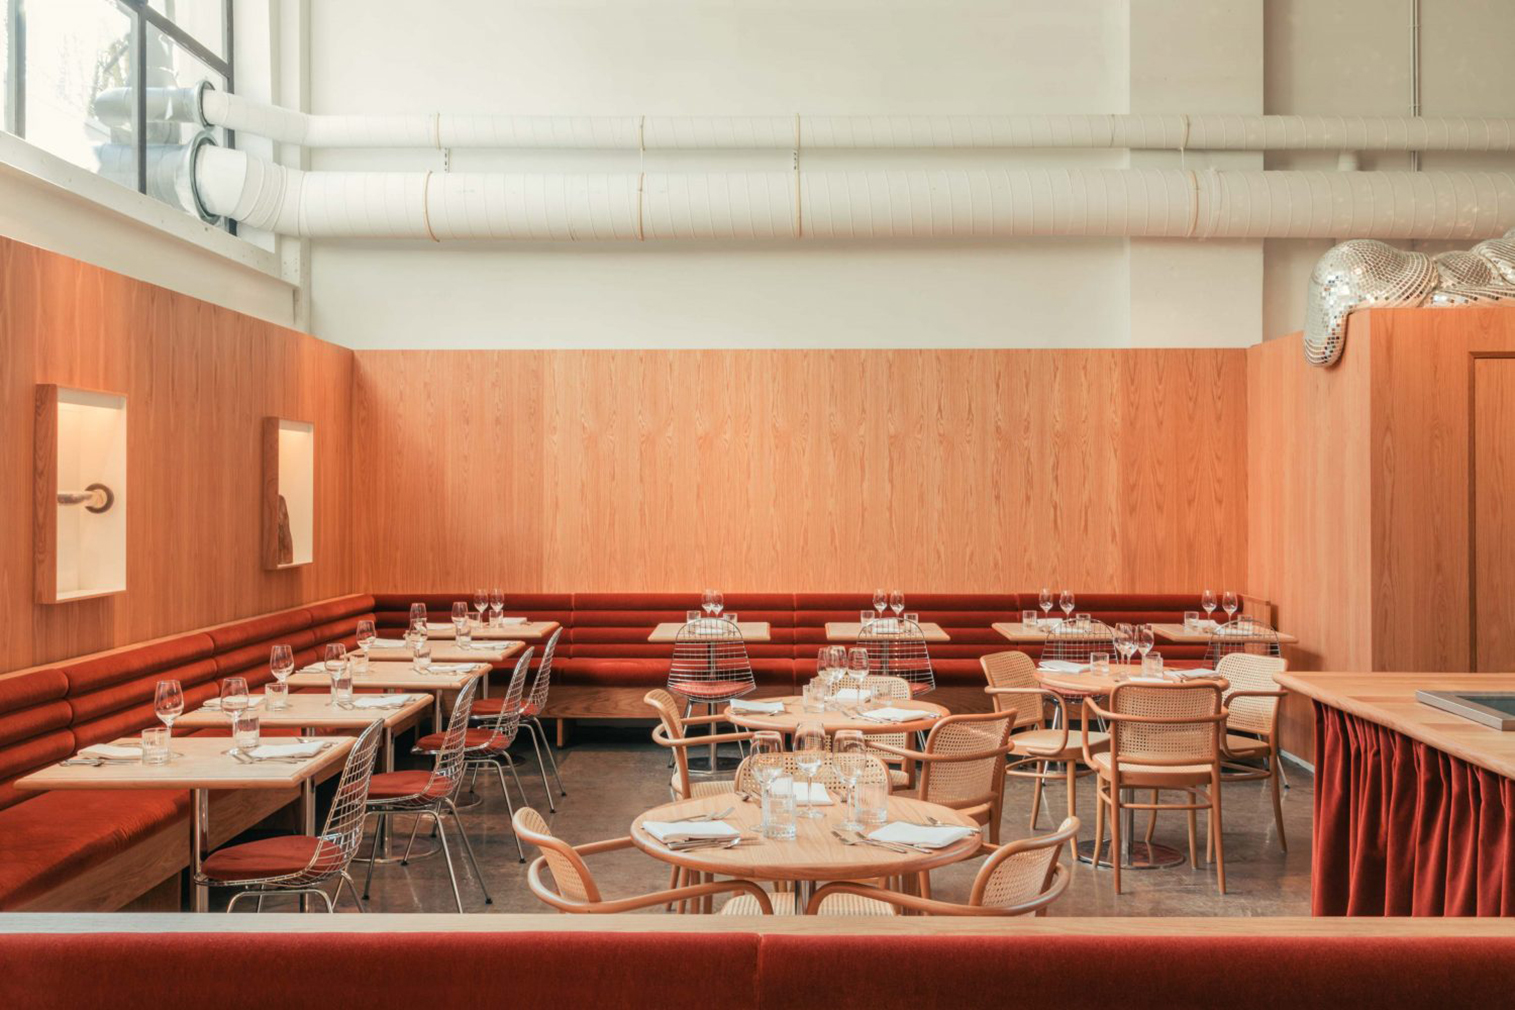 New Rotterdam culinary haunt Héroine channels the 1970s